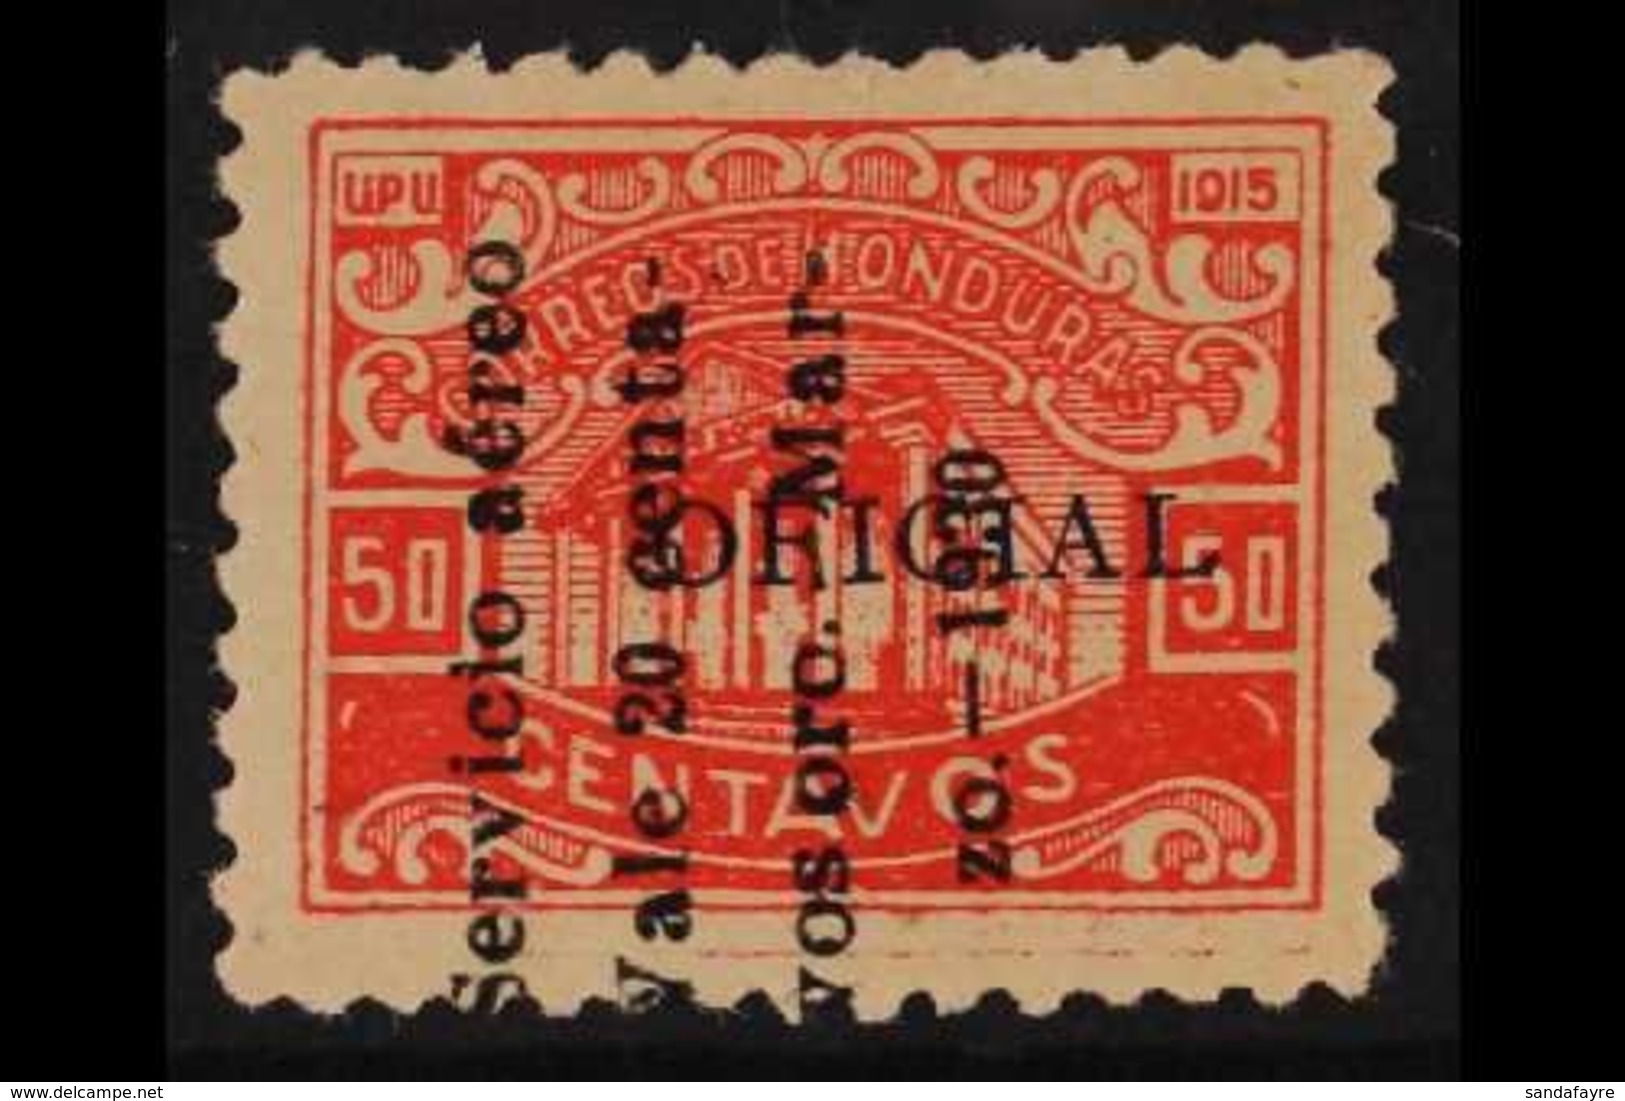 1930 AIR POST 20c On 50c Vermilion Official Stamp With 4- Line "zo. - 1930" Overprint Reading Upwards, SG 296, Mint Ligh - Honduras